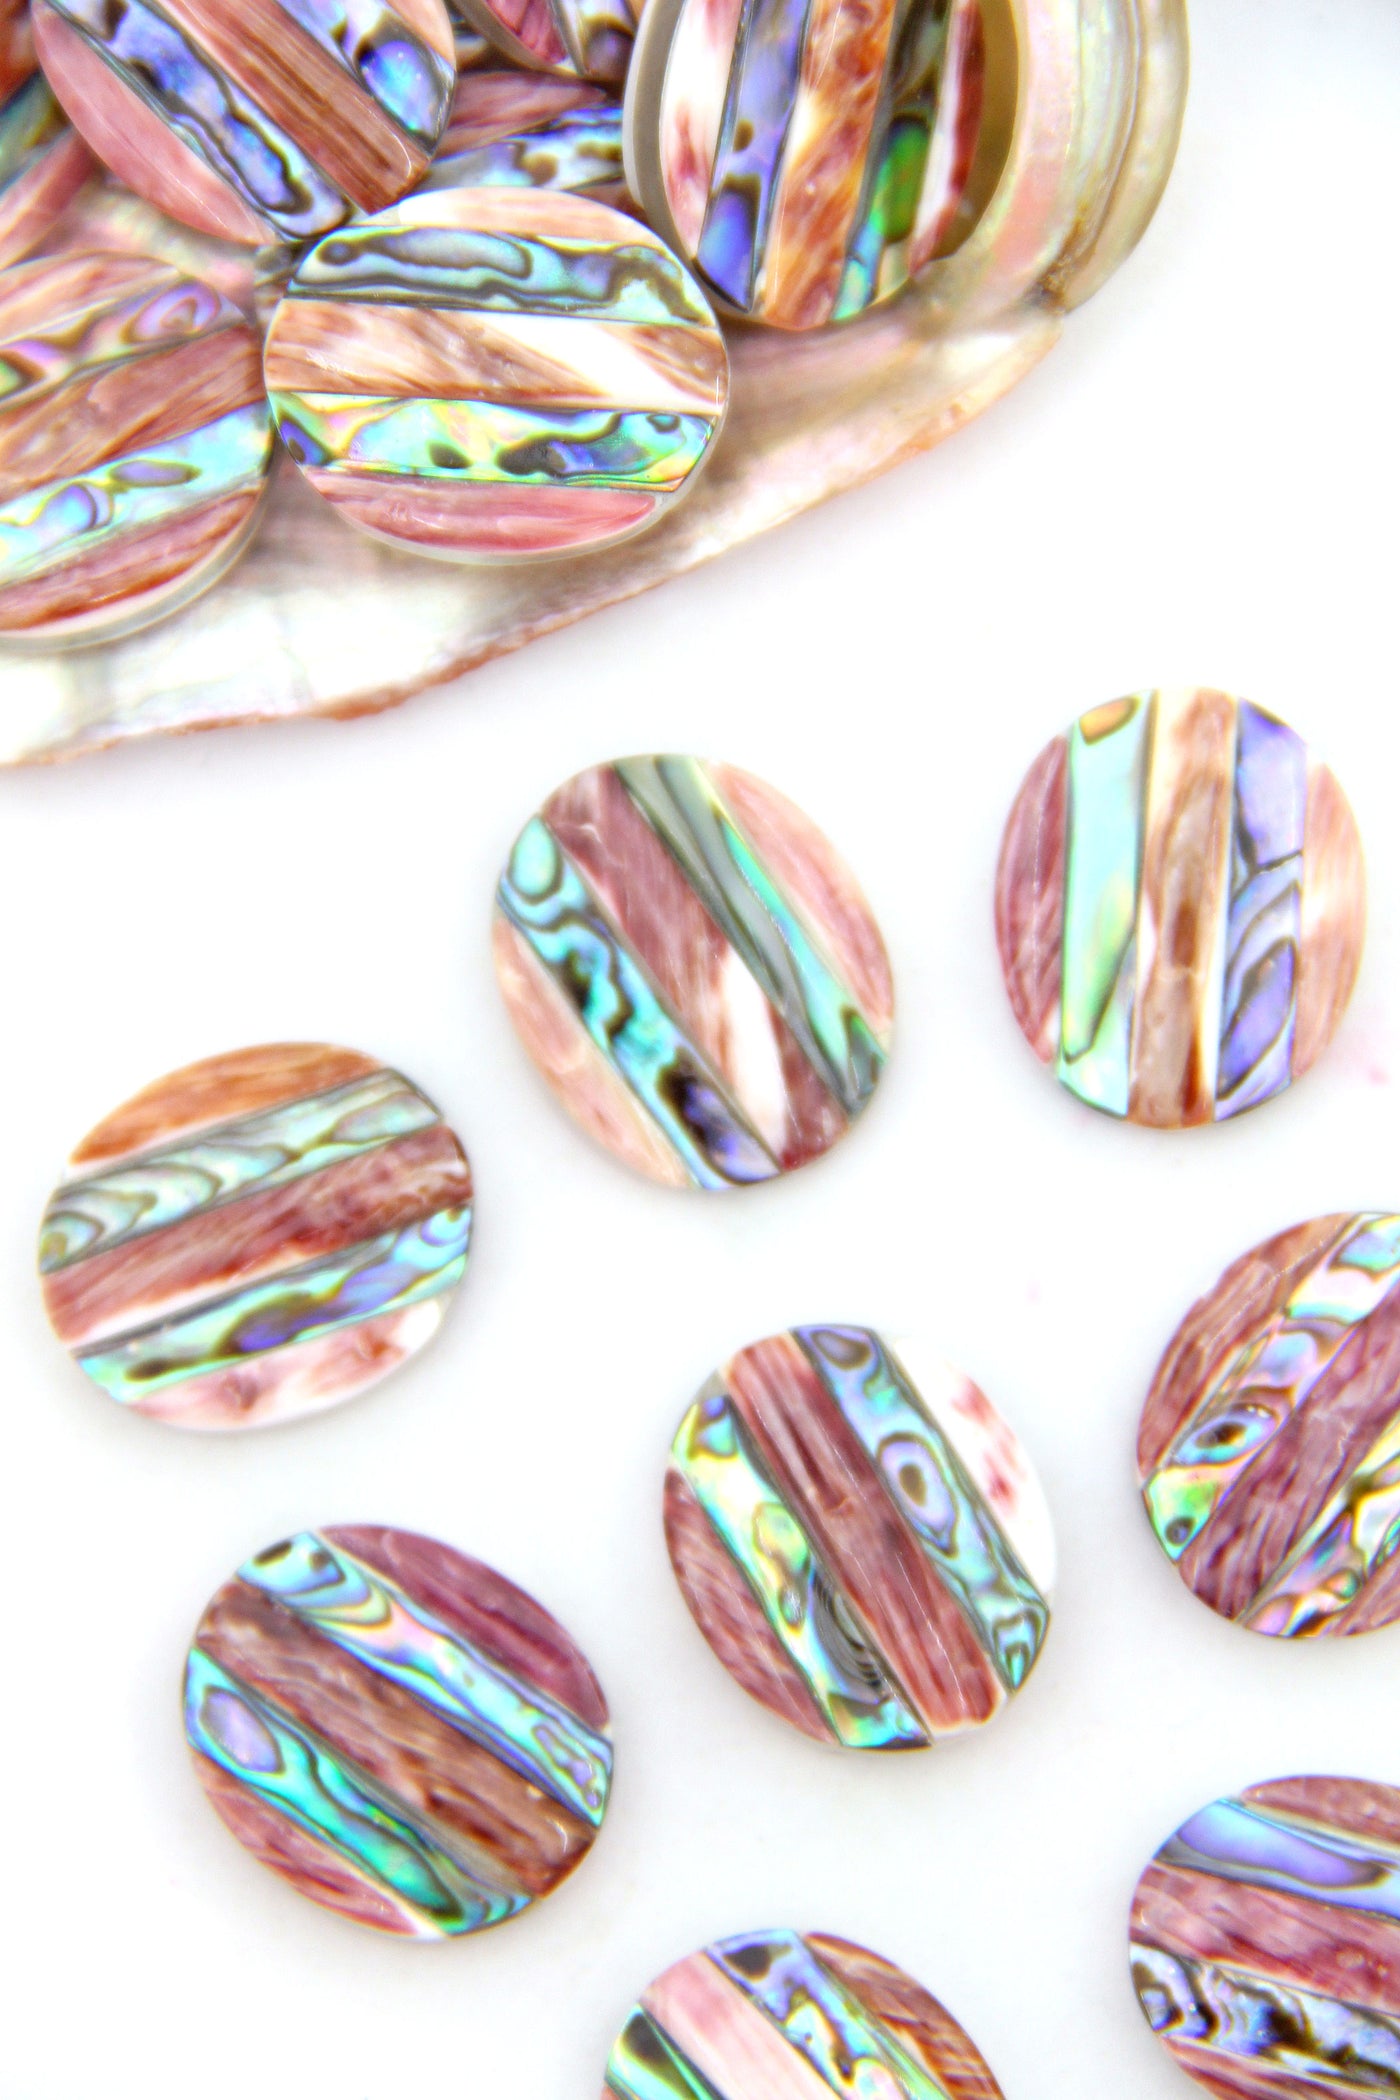 Mexican Purple Spiny Oyster & Abalone Inlaid Striped Oval Bead, 1 Charm for DIY Mermaidcore jewelry